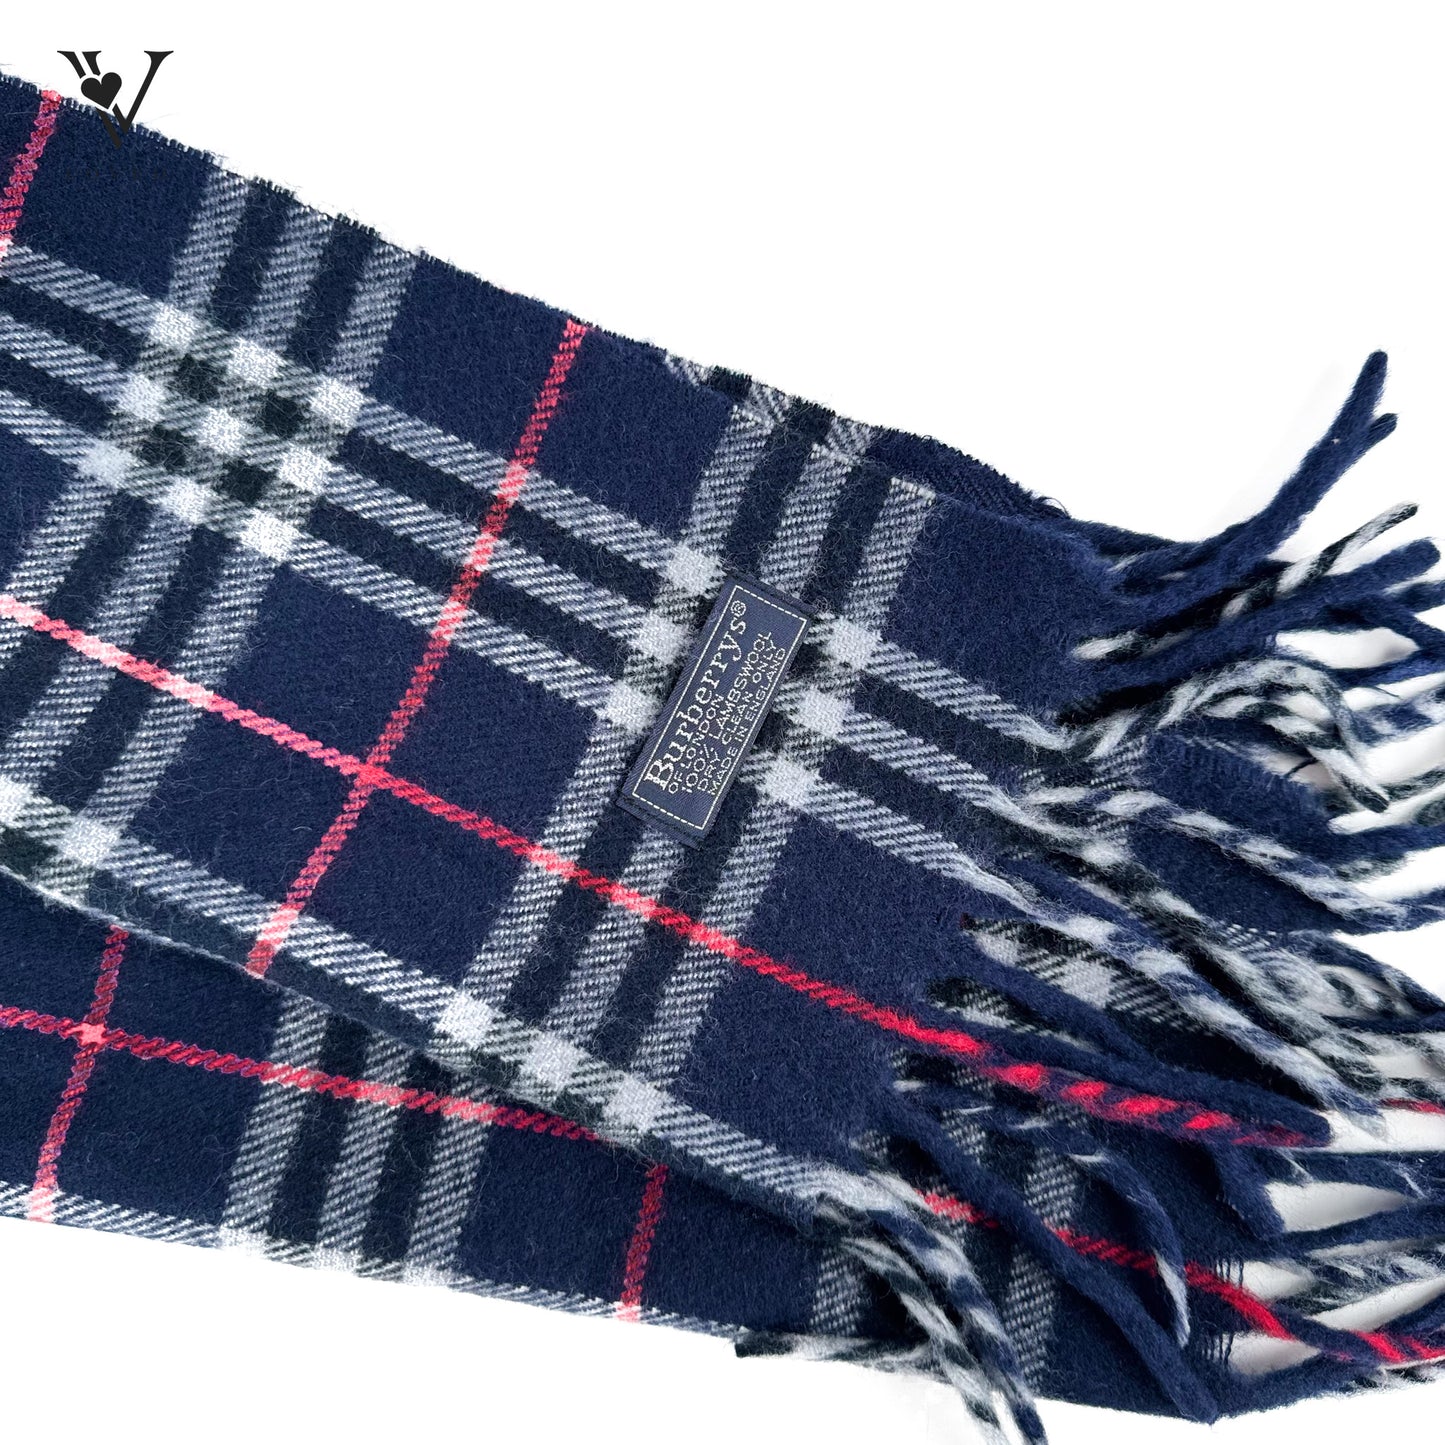 Classic Check Cashmere Scarf in Blue